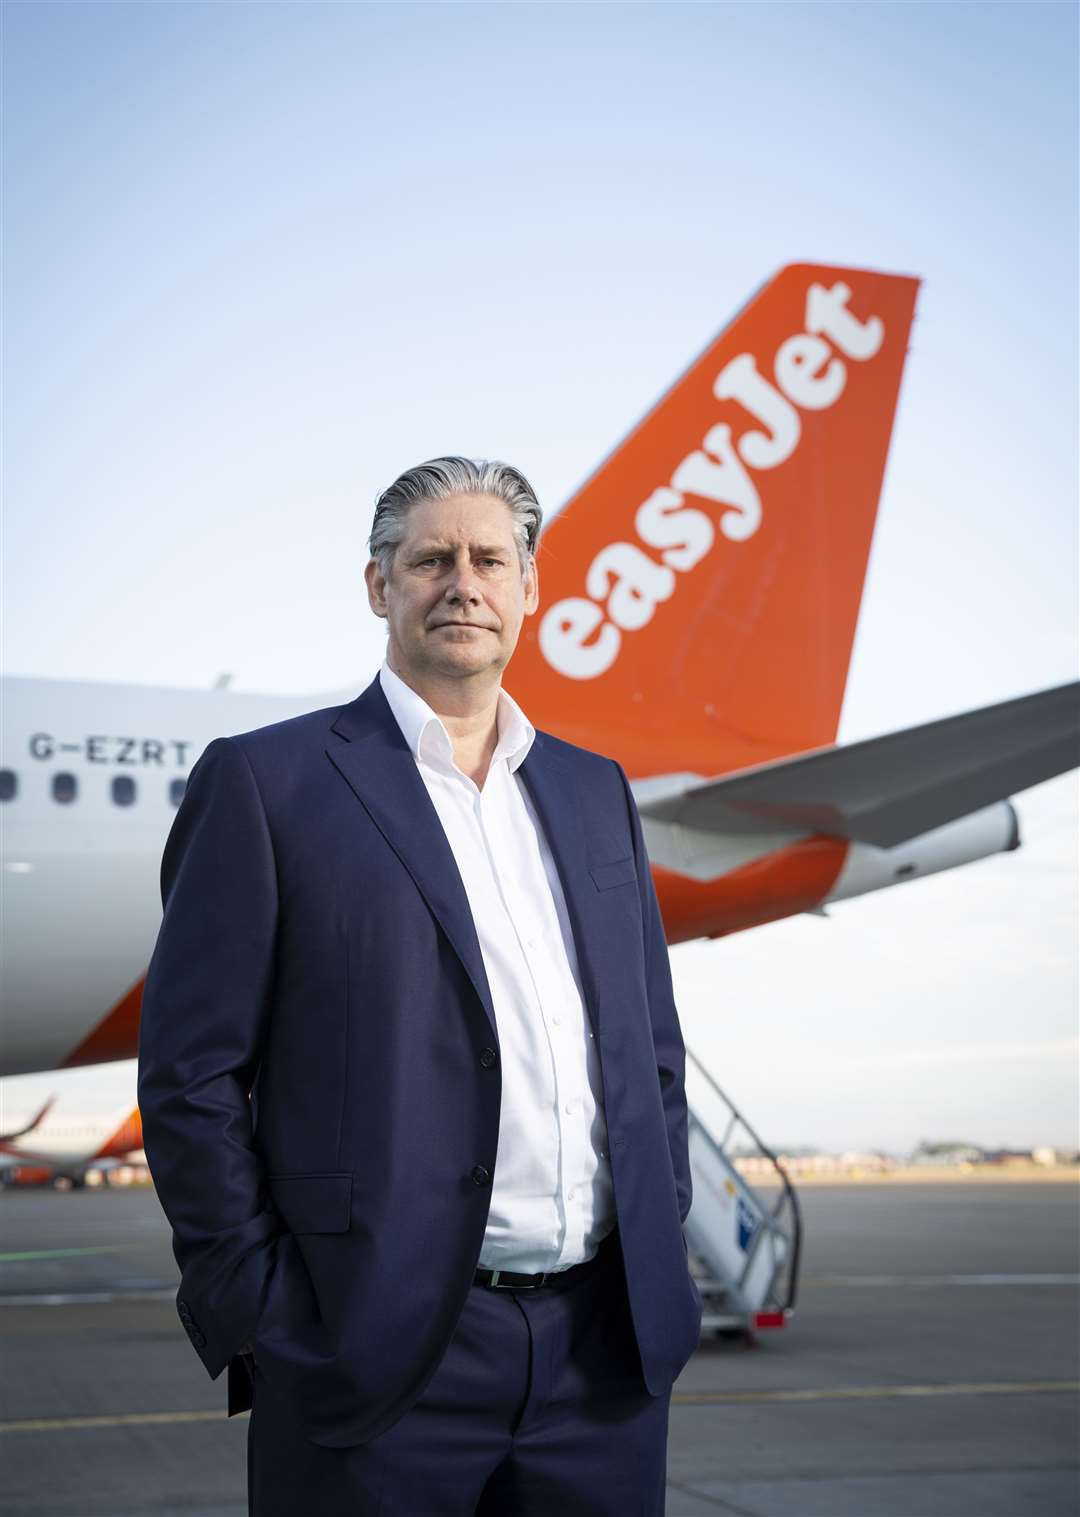 EasyJet boss Johan Lundgren said ‘our growth and focus on productivity have reduced winter losses by more than £50 million’ (Matt Alexander/PA)